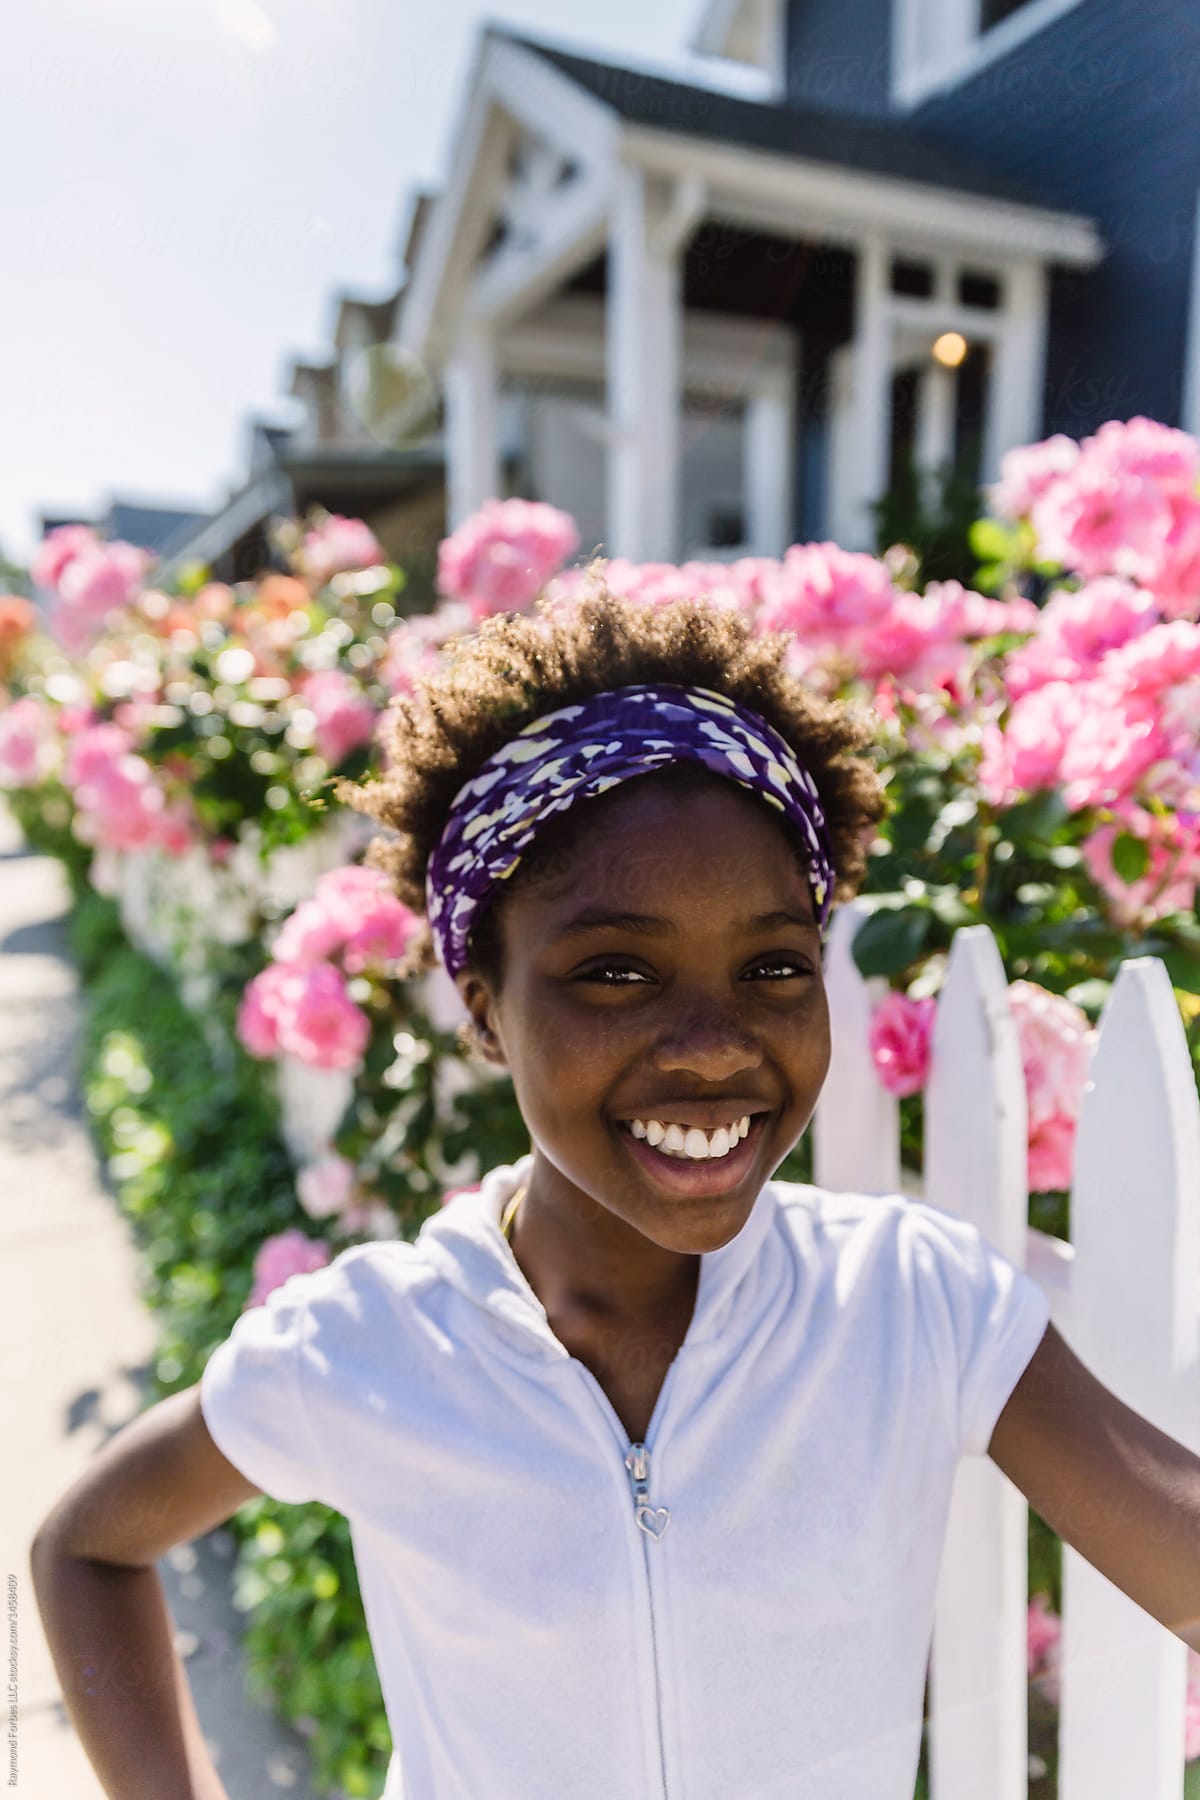 Summer Afternoon Portrait of Black Girl with Summer Roses